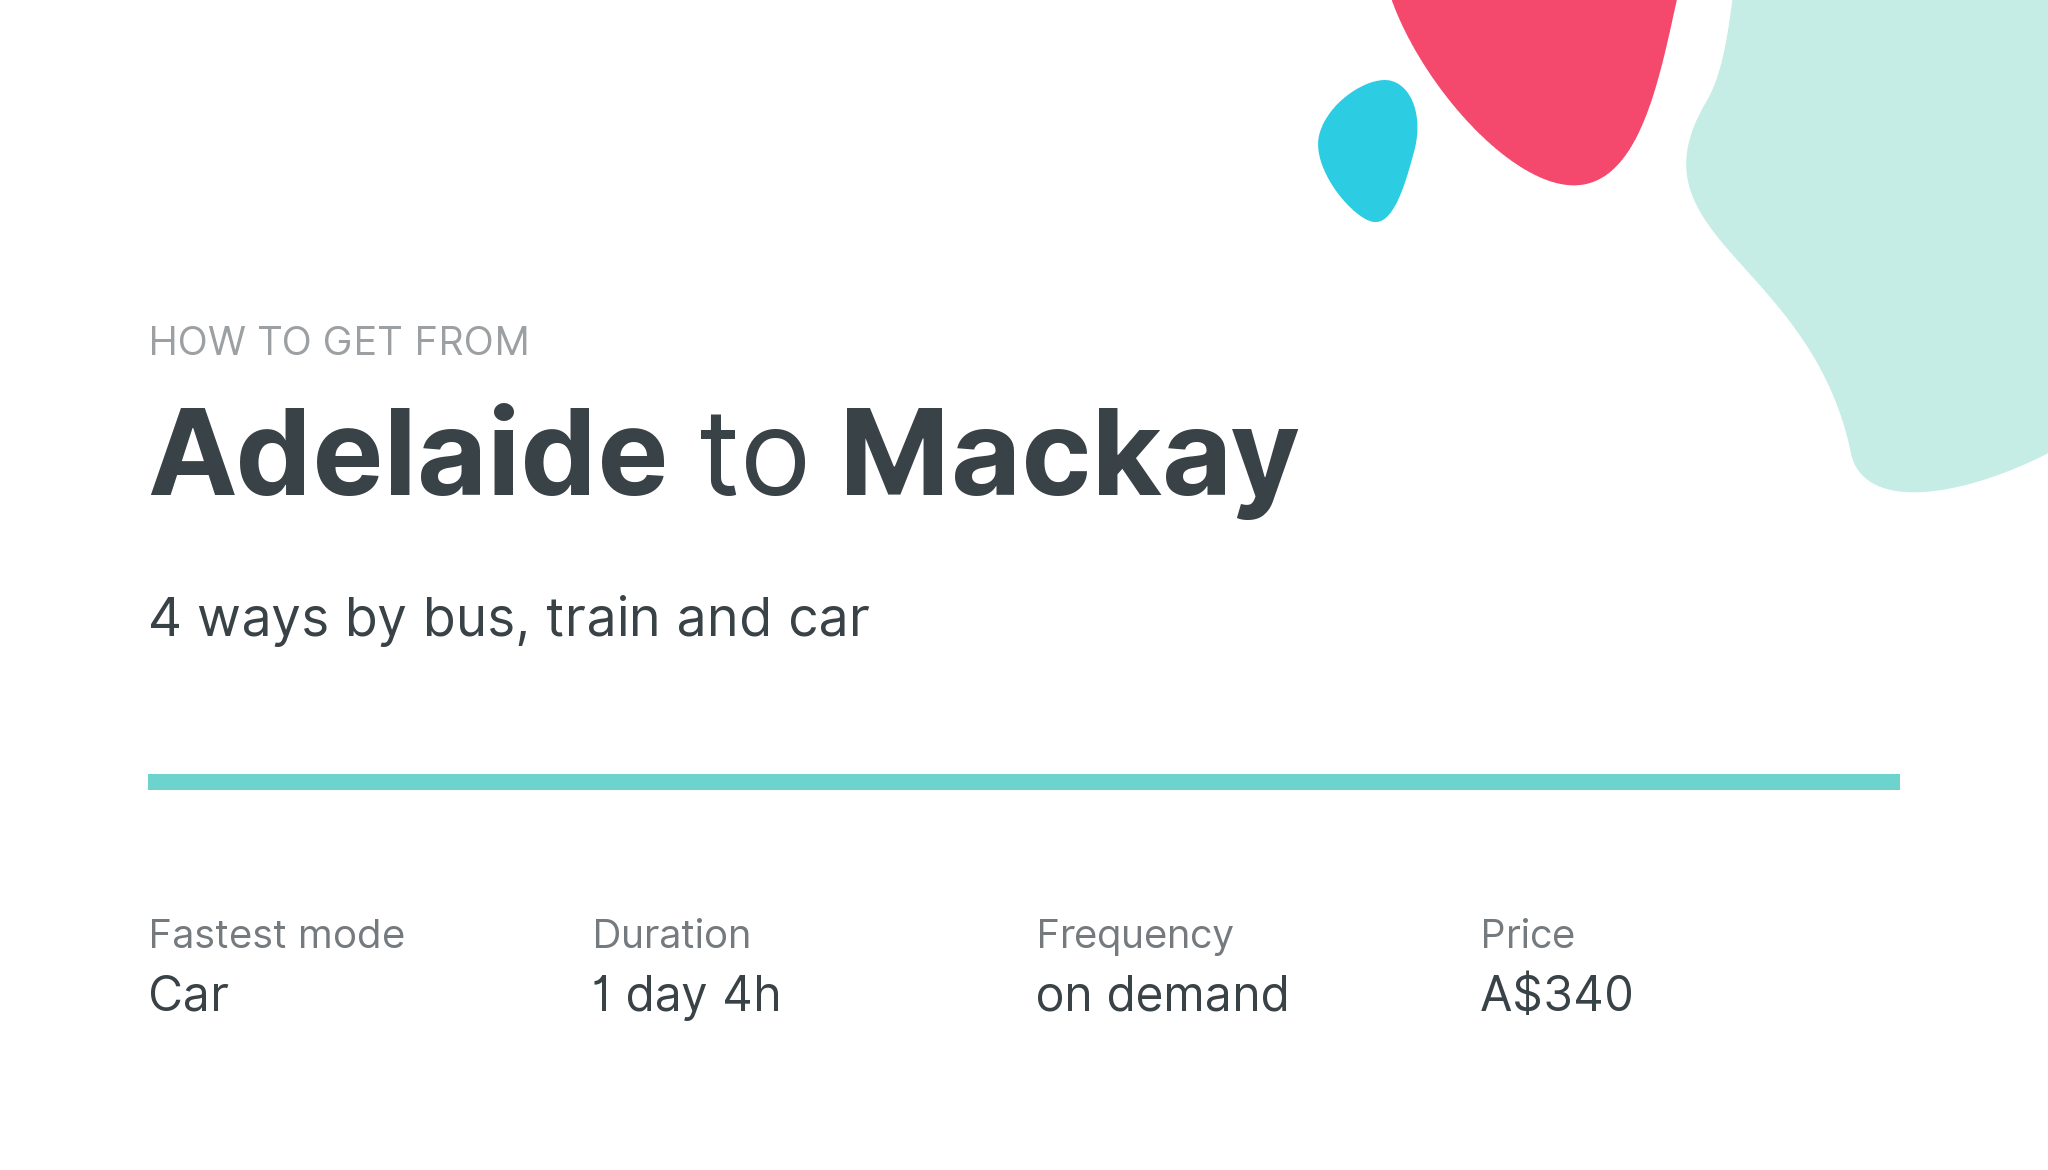 How do I get from Adelaide to Mackay